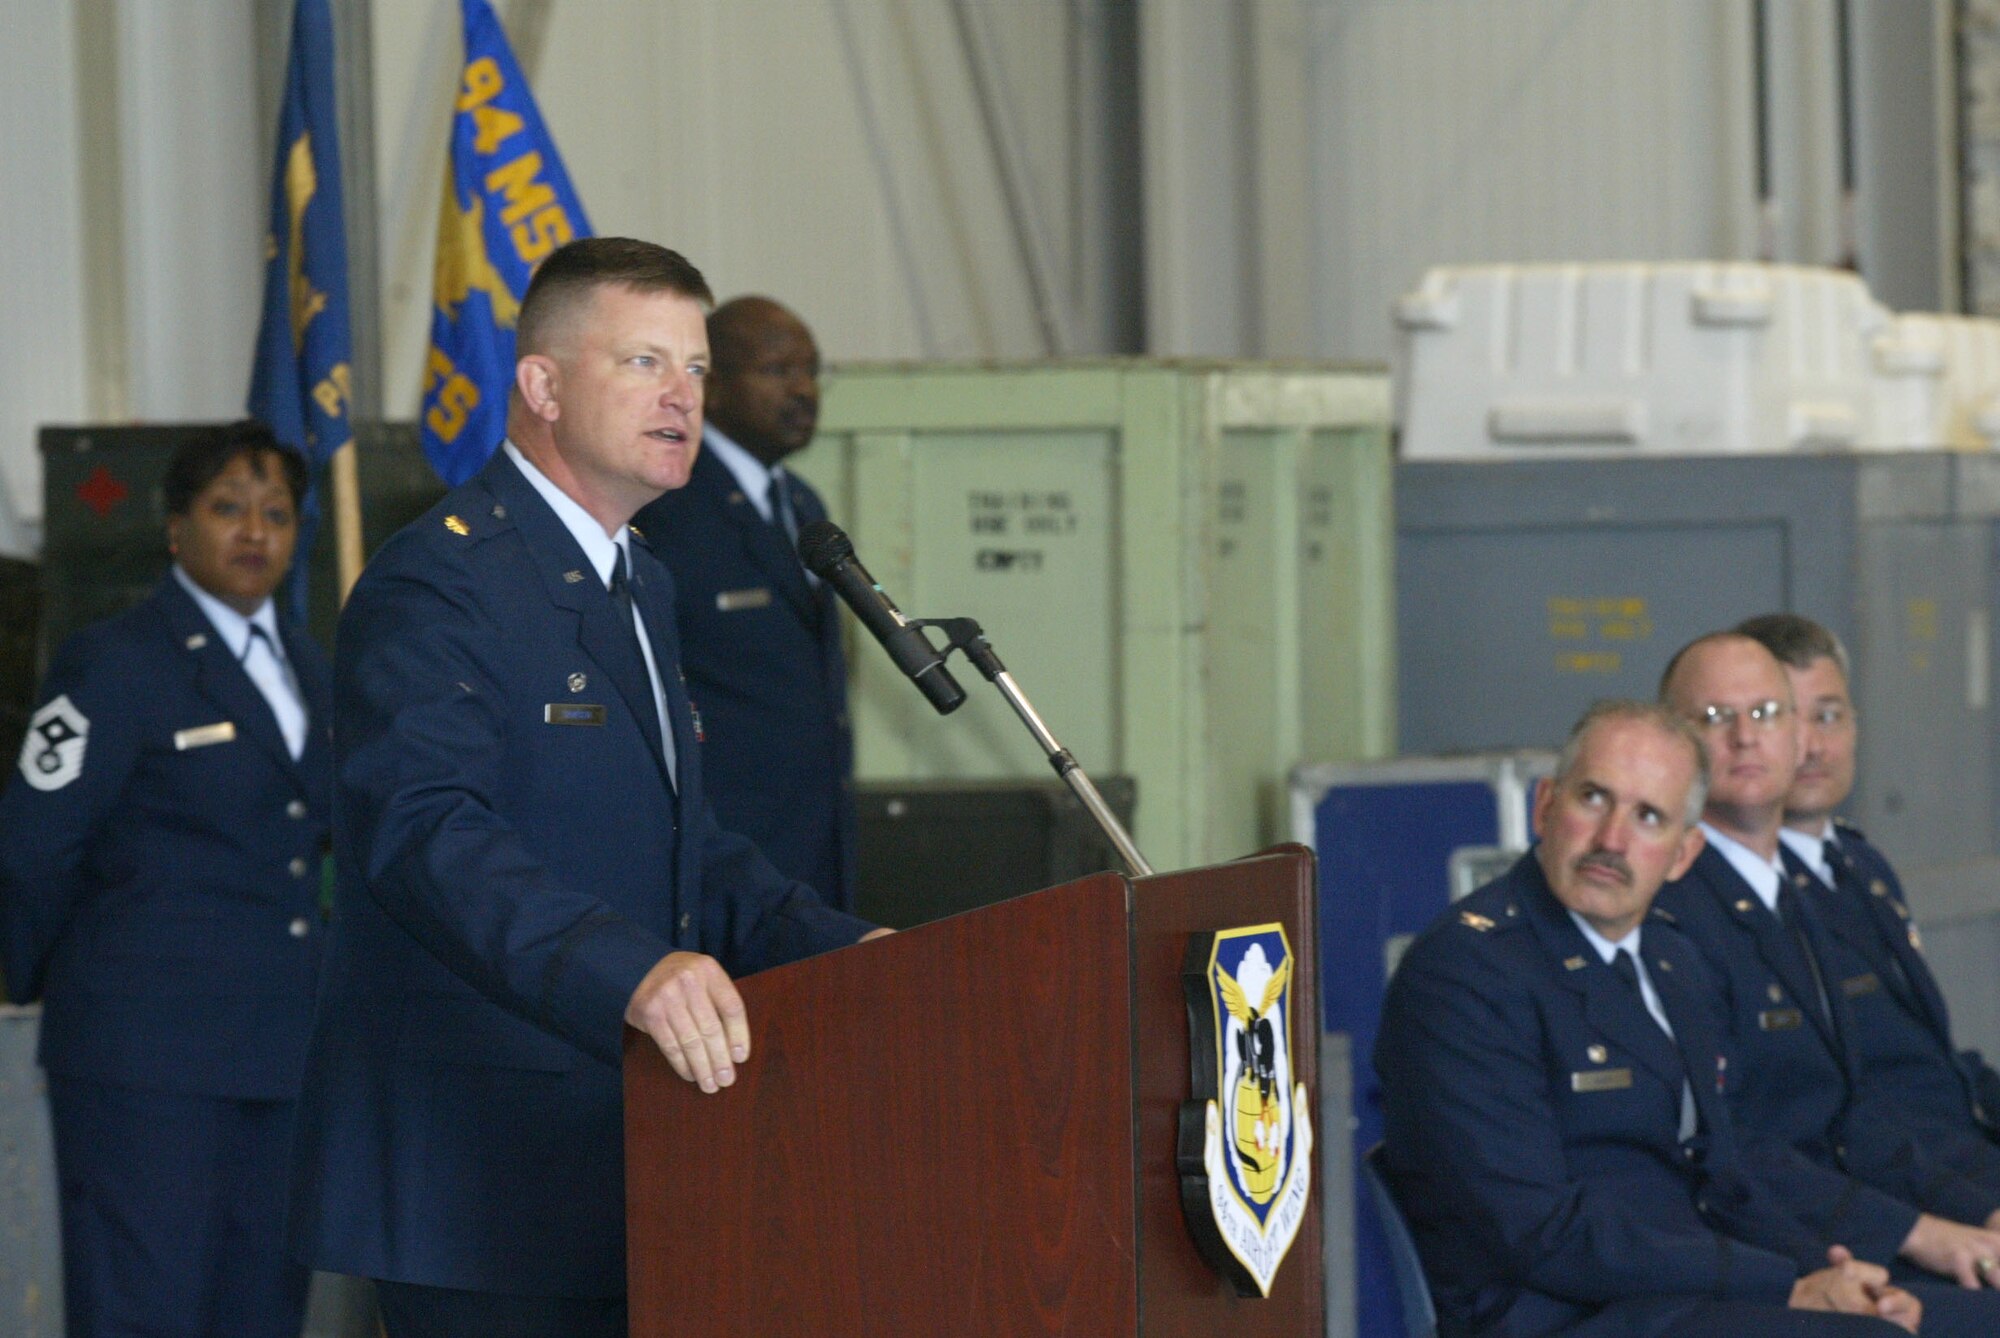 Maj. Kent D. Hansen assumed command of the 94th Security Forces Squadron.  Addressing members of his new squadron, Major Hansen said, "I am honored and dedicated to serve with you."